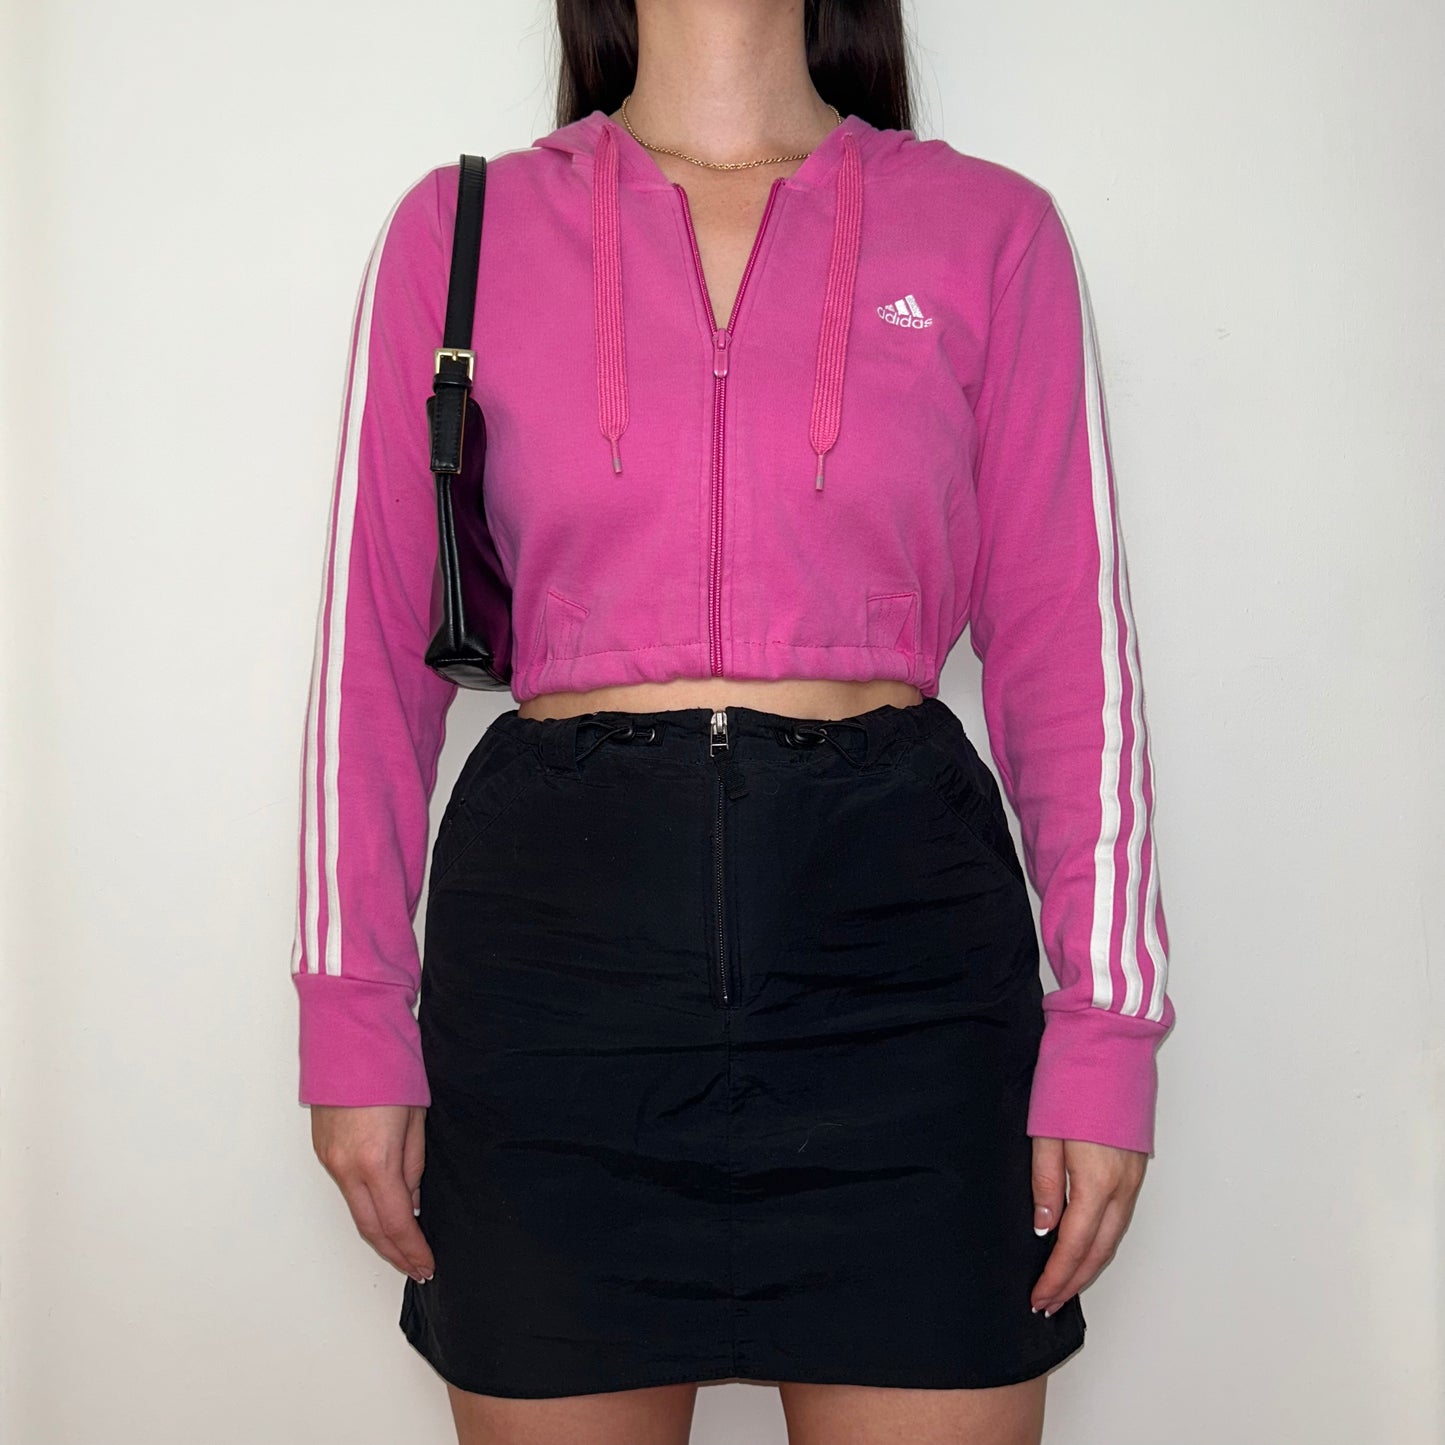 pink zip up hoodie with white adidas logo shown on a model wearing a black mini skirt and black shoulder bag